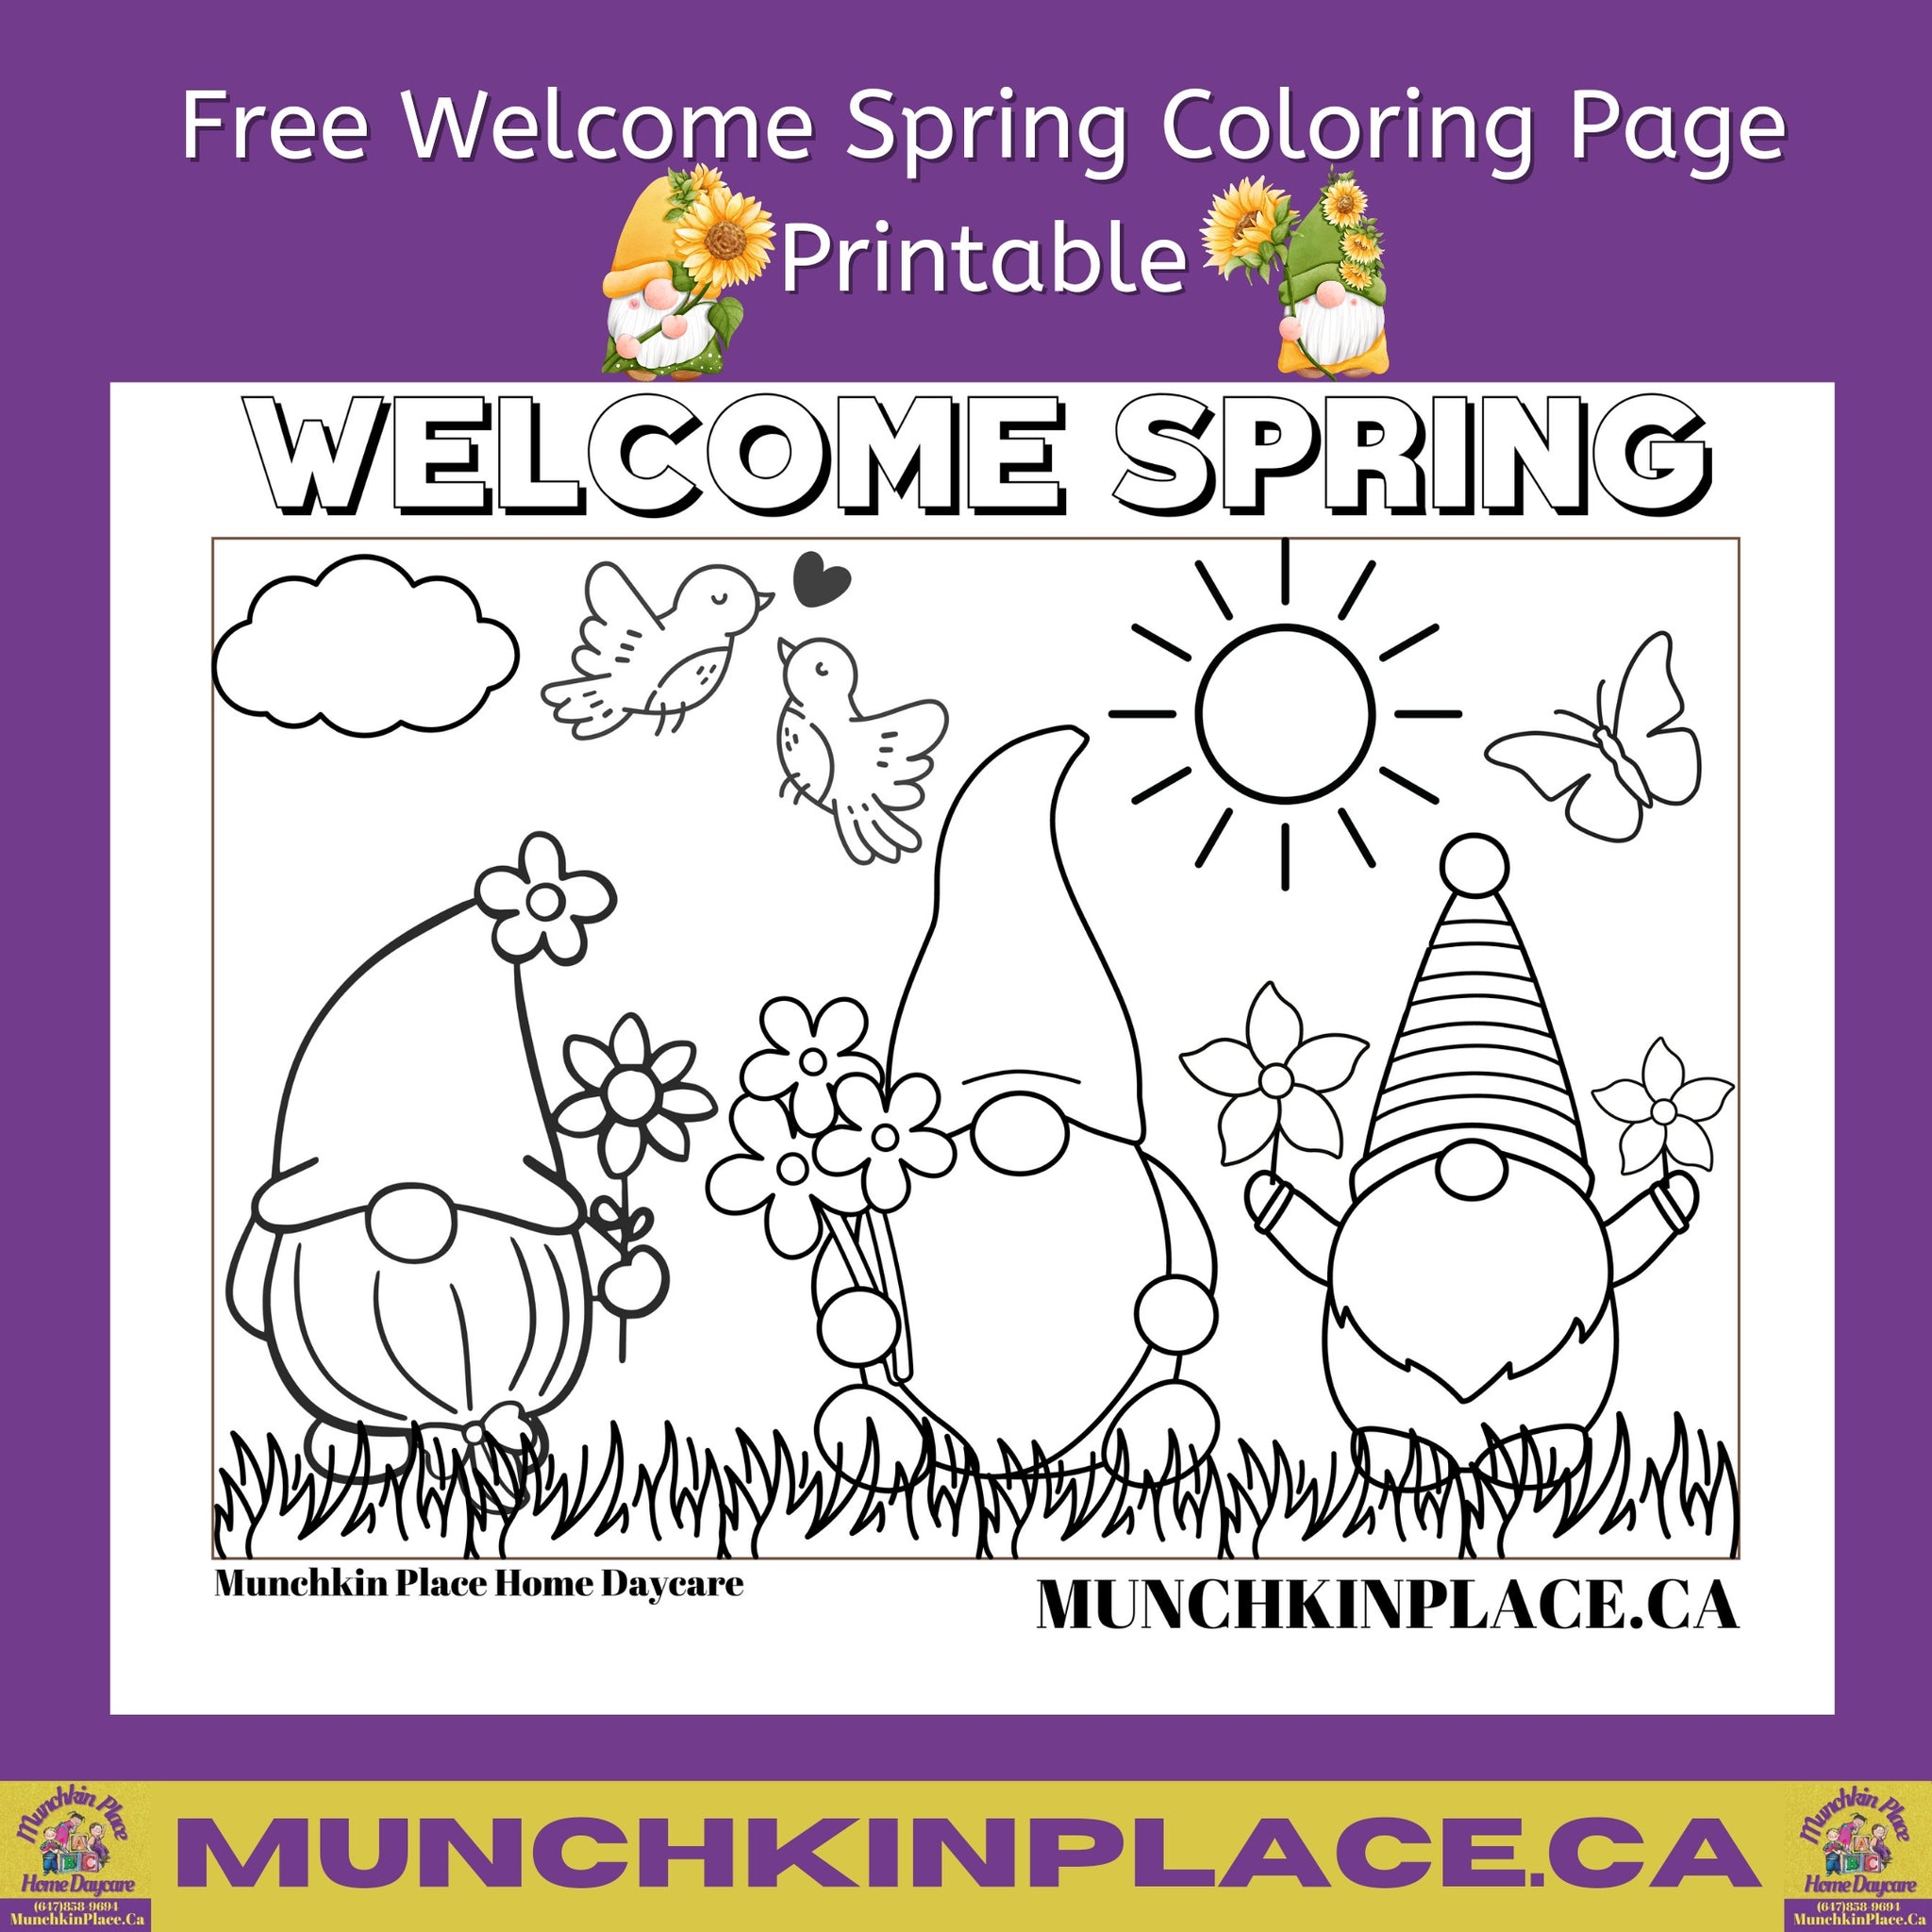 Welcome Spring Free Coloring Page Printable